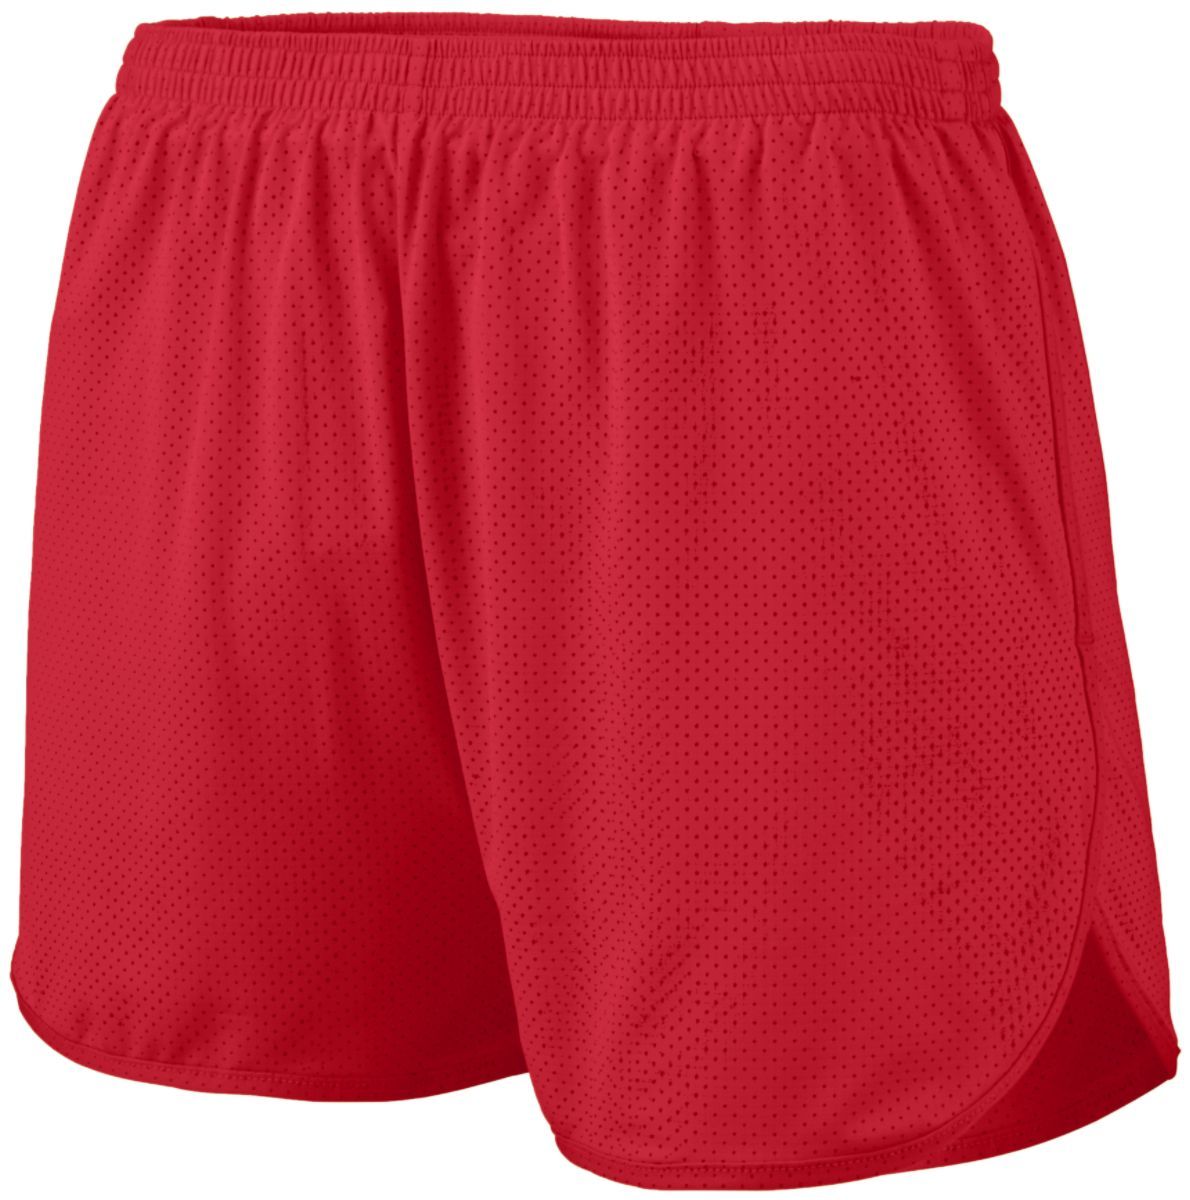 Augusta Sportswear Solid Split Shorts in Red  -Part of the Adult, Adult-Shorts, Augusta-Products, Track-Field product lines at KanaleyCreations.com